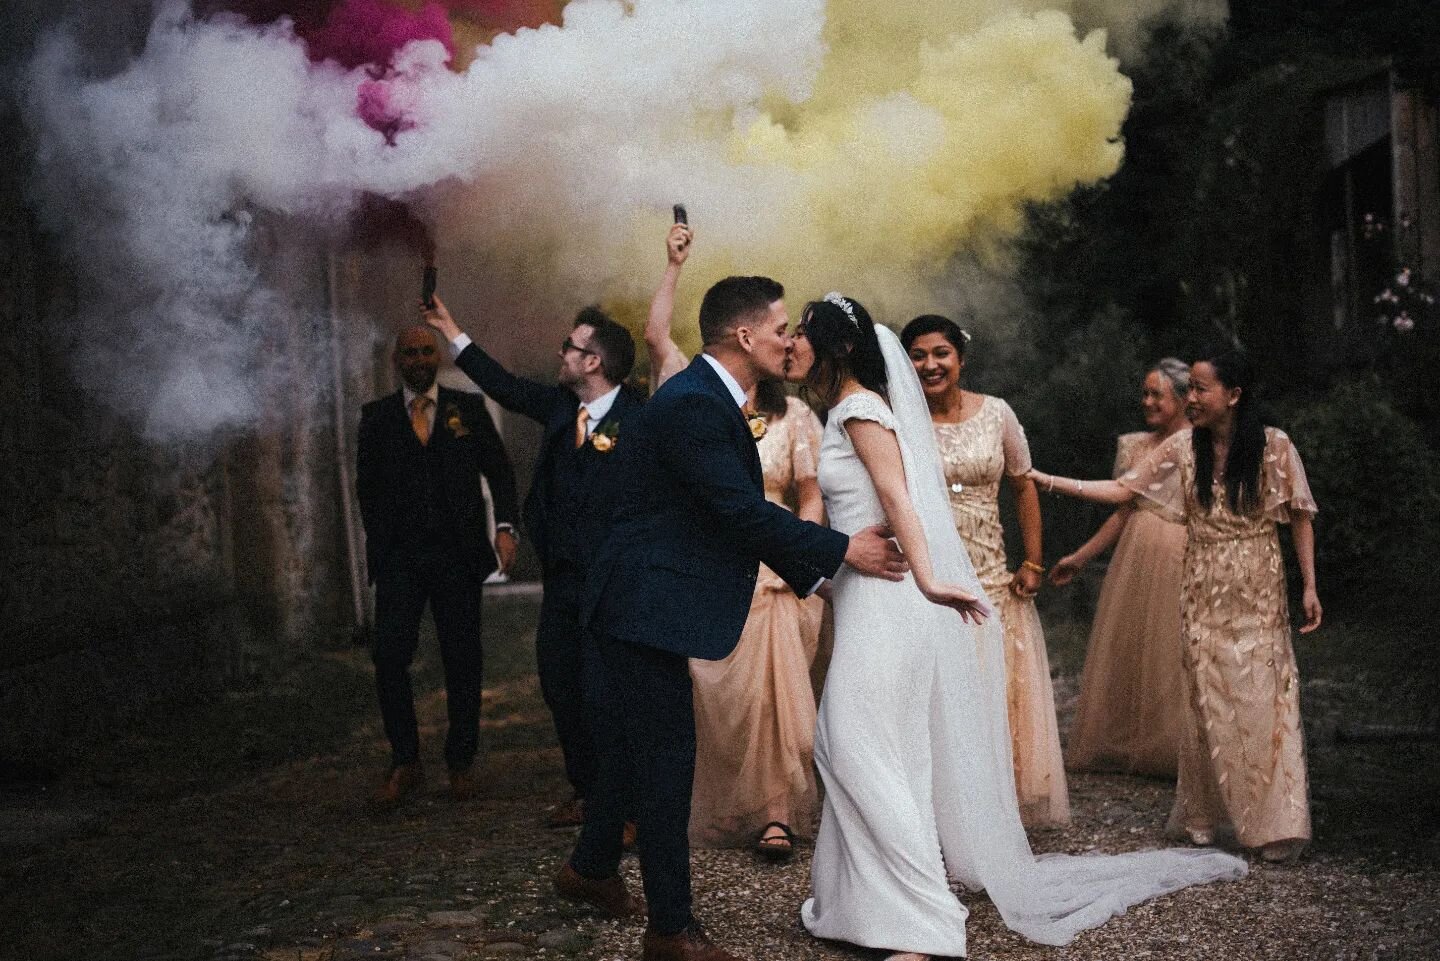 M O O D Y  W E D D I N G  V I B E S //

How awesome is this moody vibe shot. With a pop of colour from the yellow, pink &amp; white smoke grenades to add effect.

This is why I love doing what I do...🤍💗💛

#weddinggoals #moodygrams #moodyports #lov